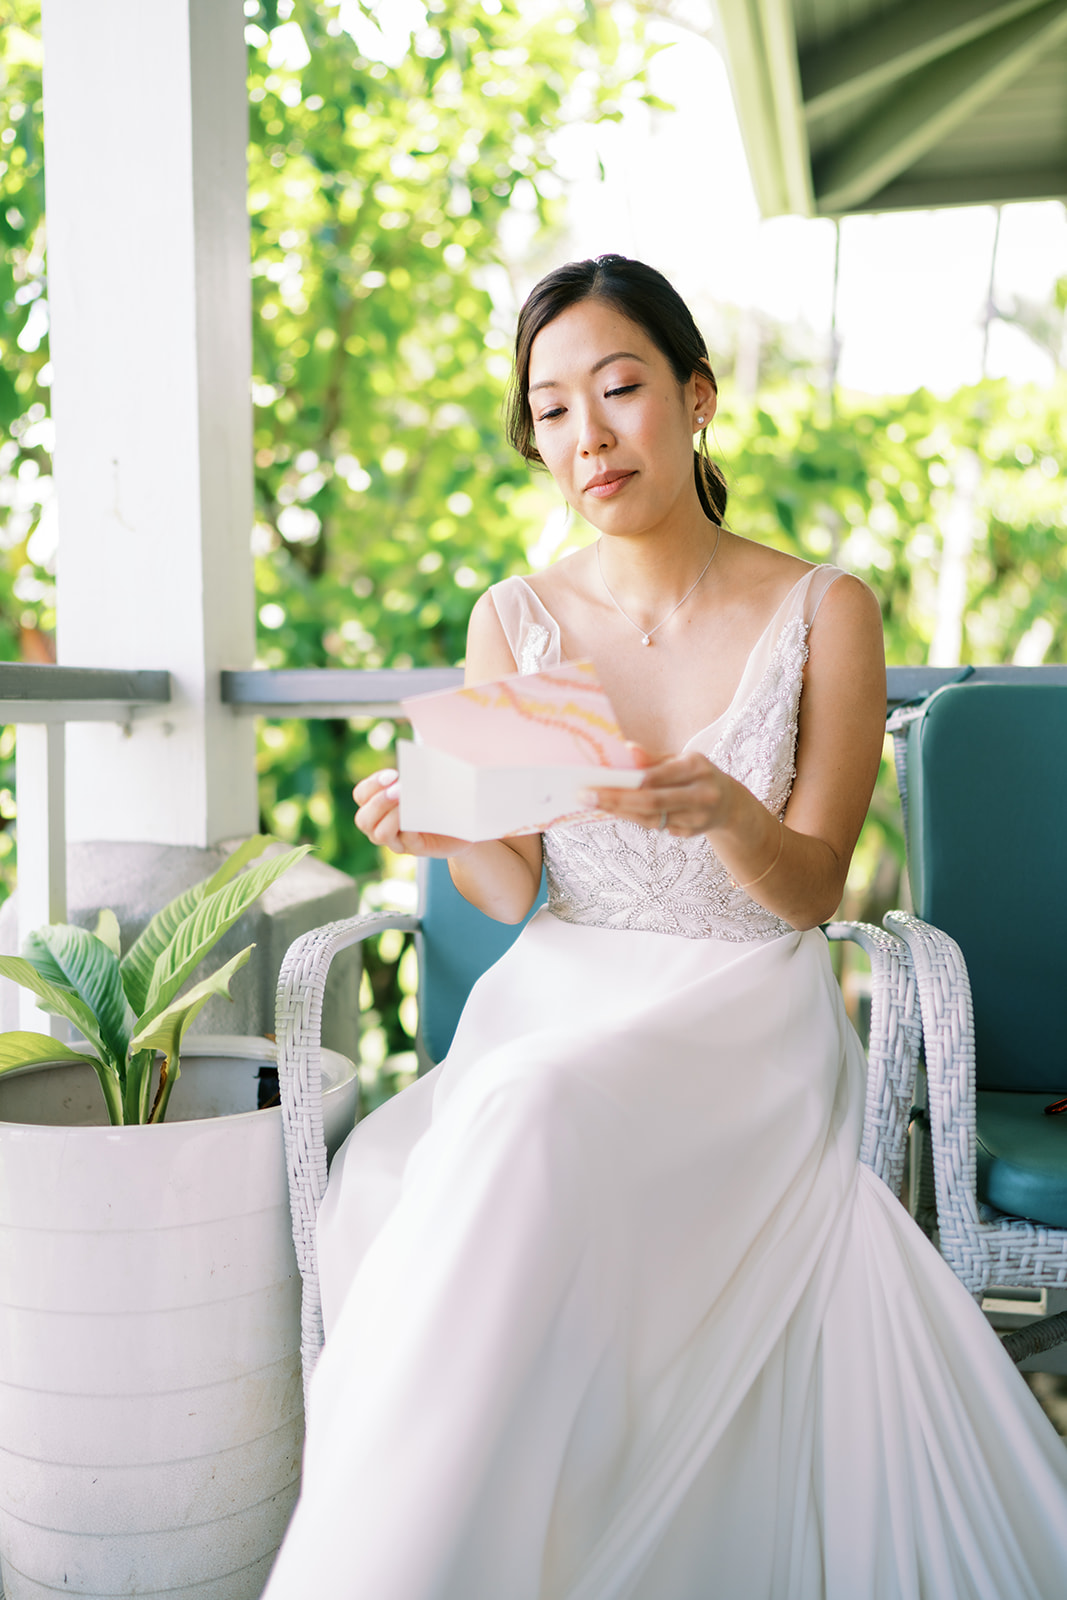 Bride in a white dress sitting on a patio holding a small pink gift box captured by Oahu Wedding Photographer